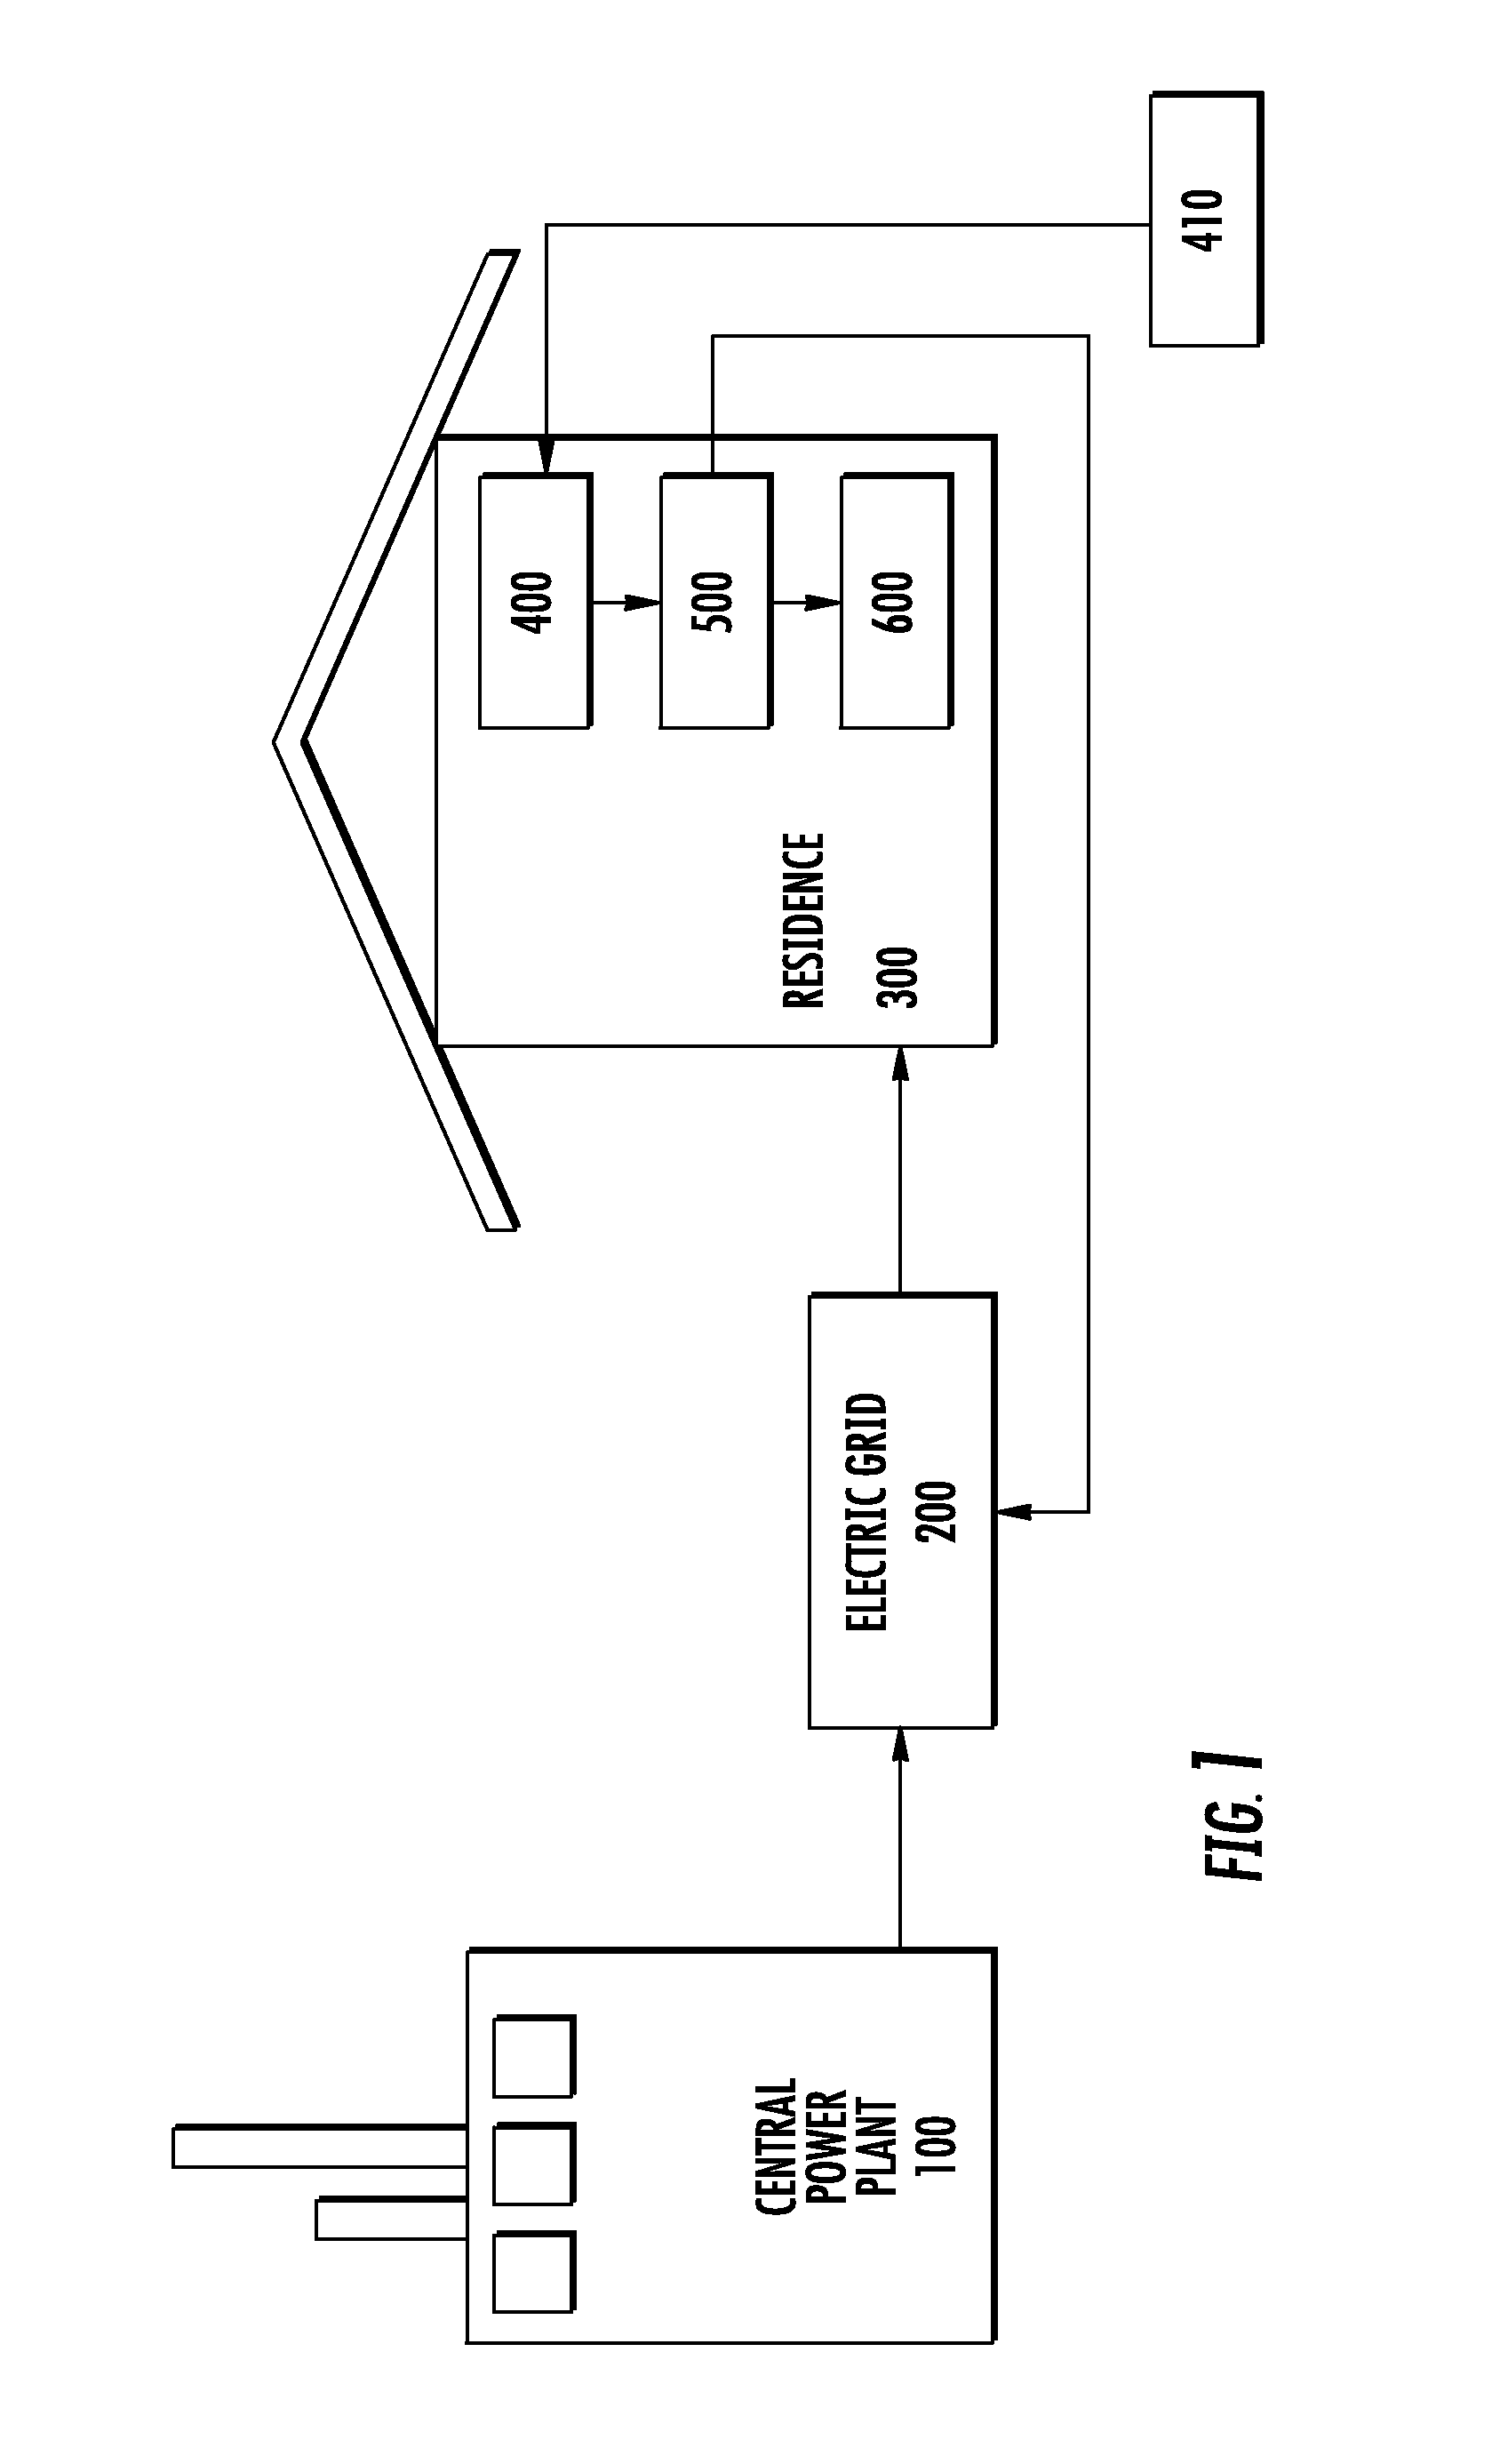 High efficiency cogeneration system and related method of use